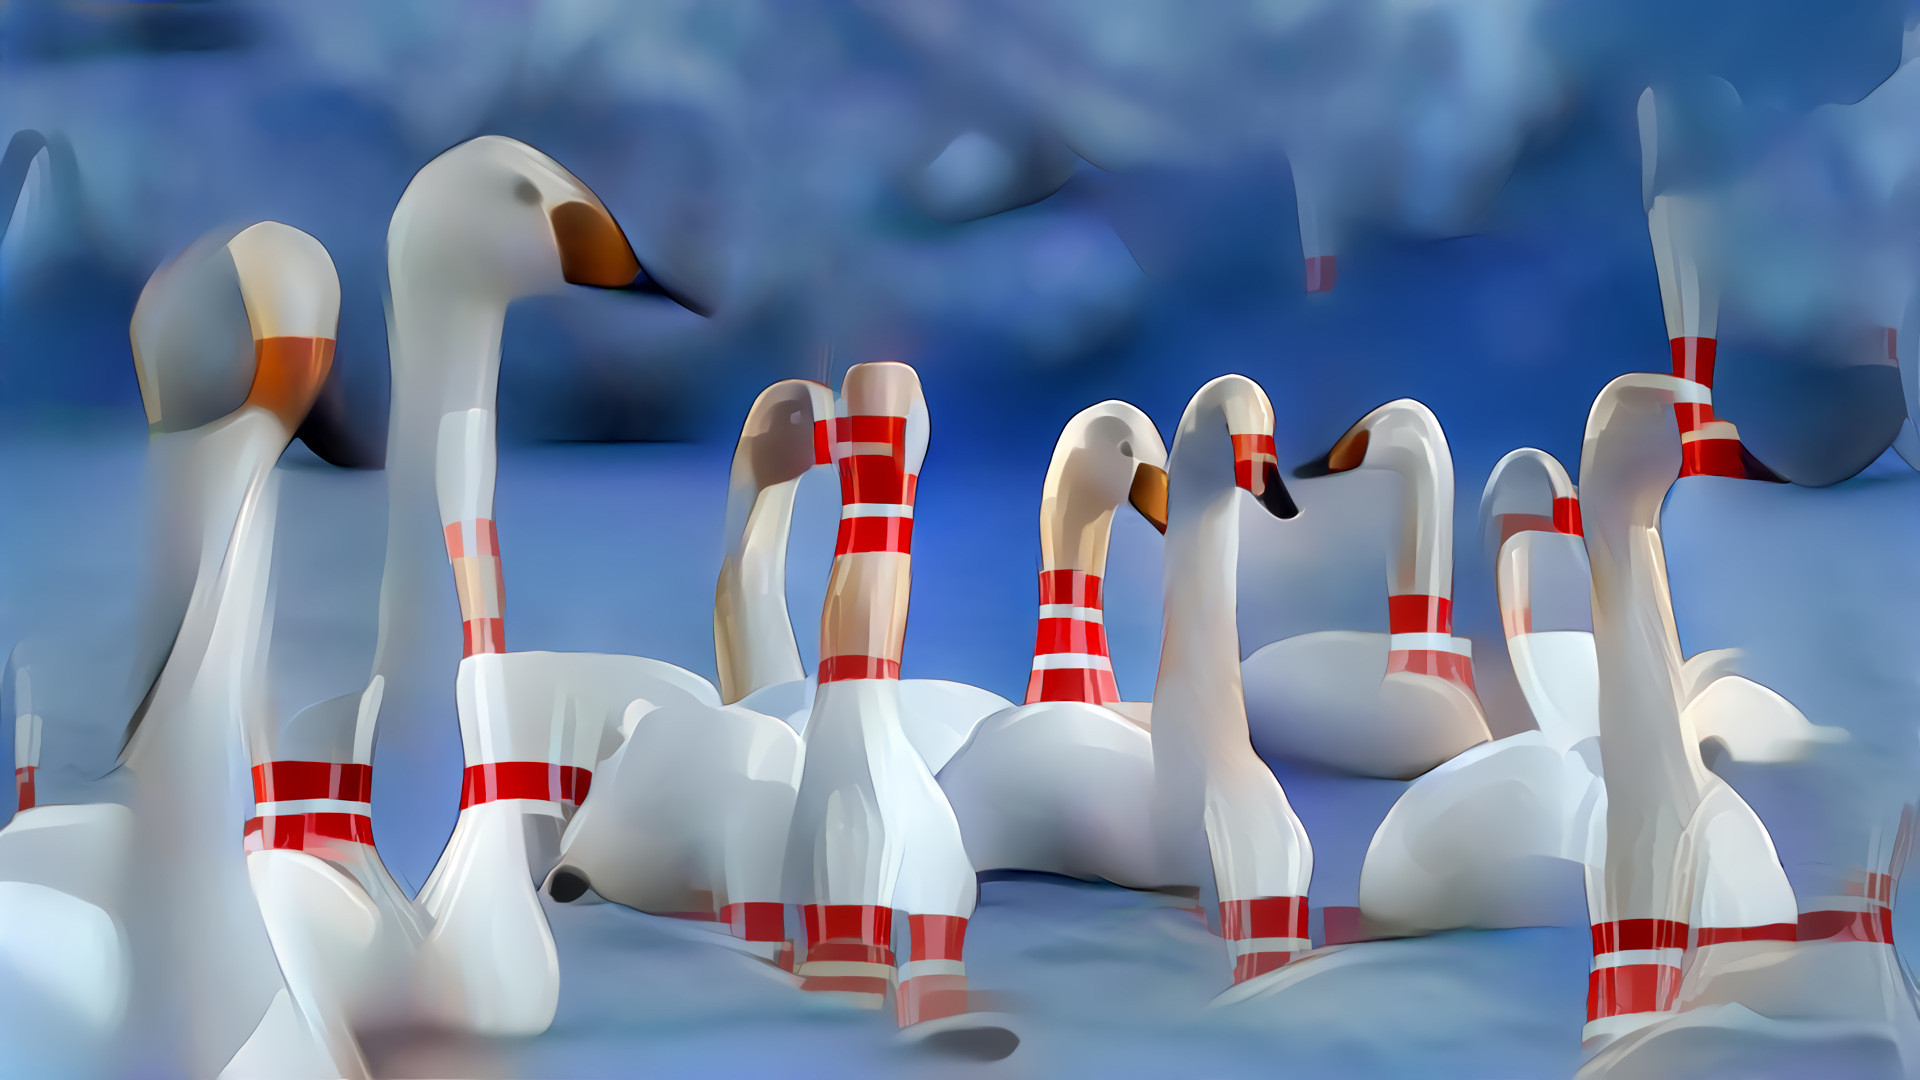 Bowling Birds v2 (DS2 redux of a dream from a year ago)